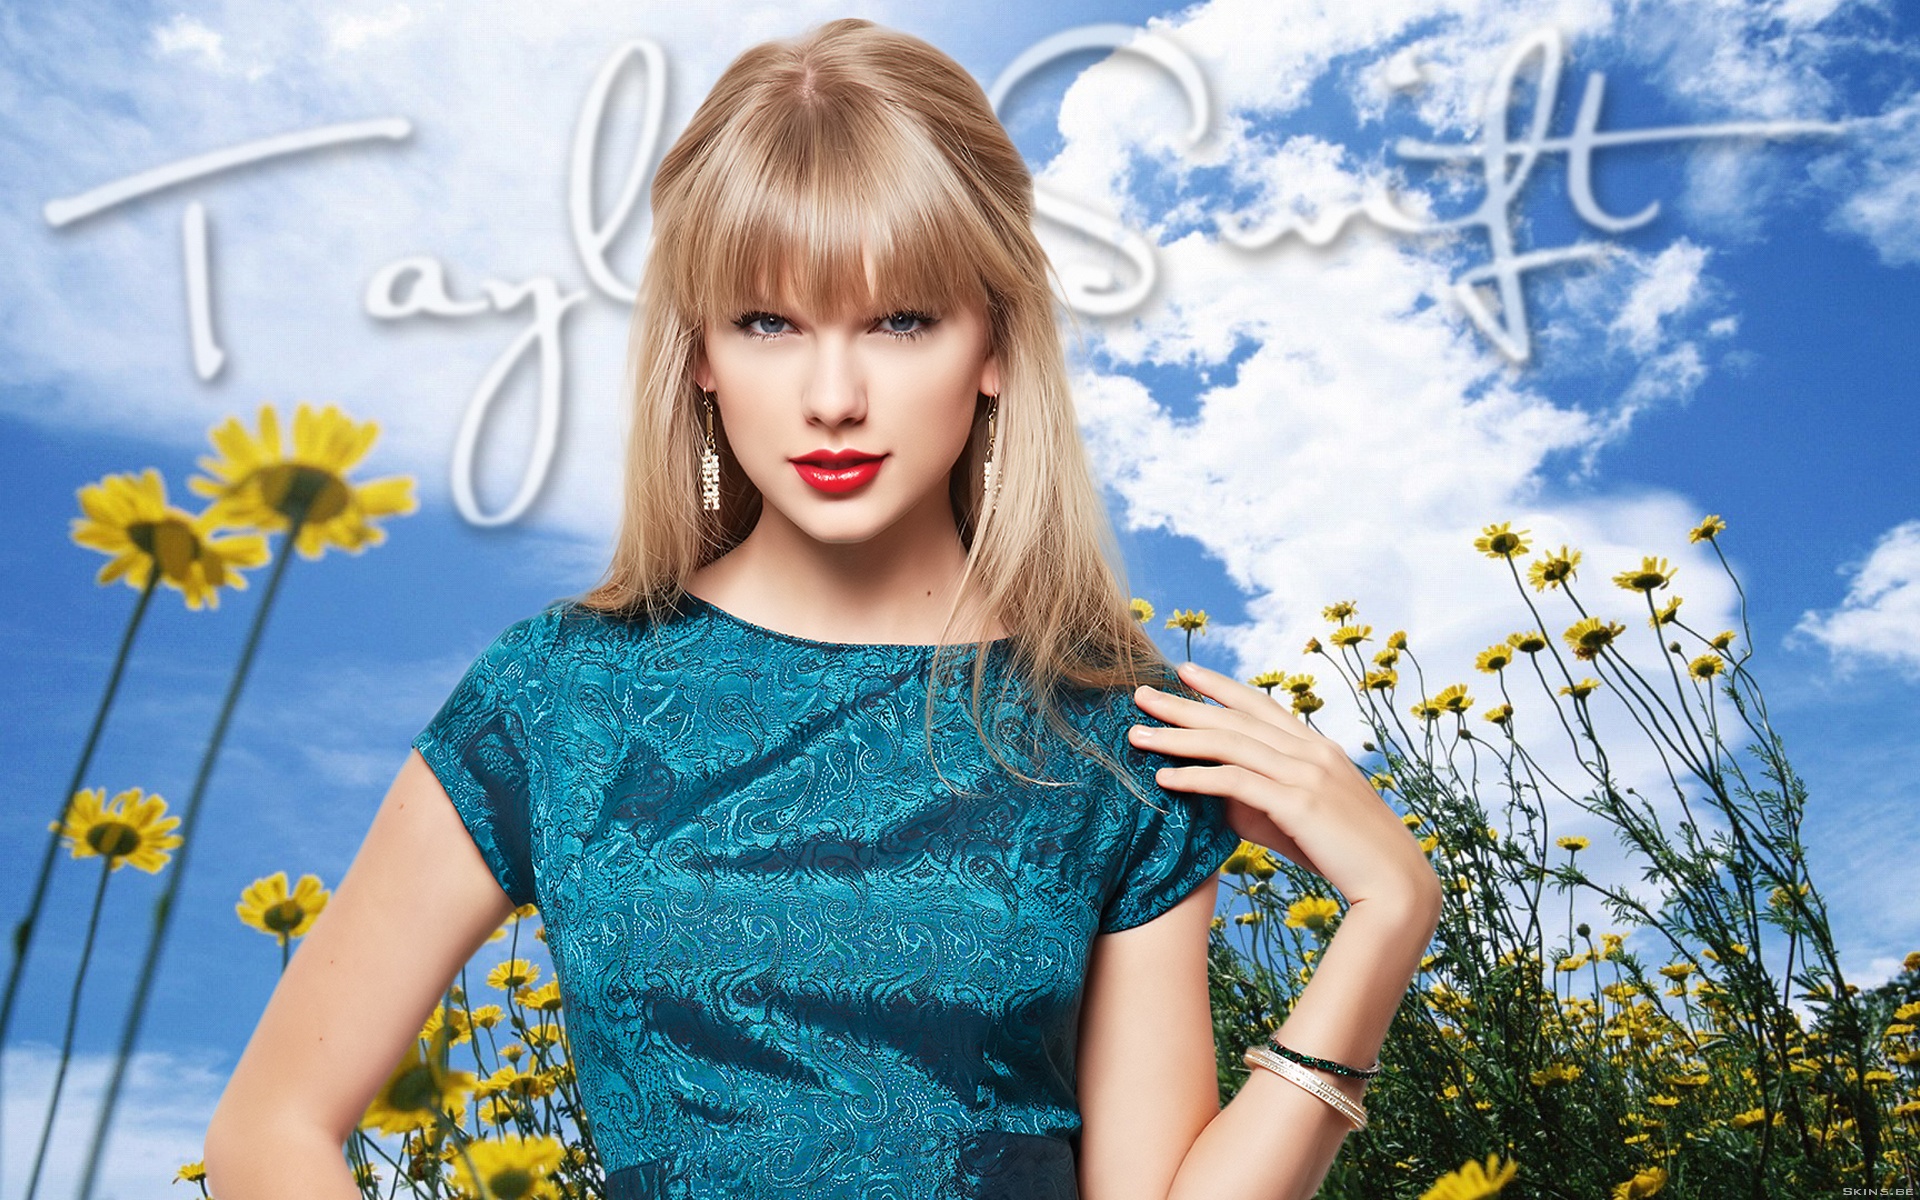 Free Download Poster Taylor Swift 15 Hd Wallpapers 19x10 For Your Desktop Mobile Tablet Explore 48 Taylor Swift 16 Wallpaper Taylor Swift Wallpaper